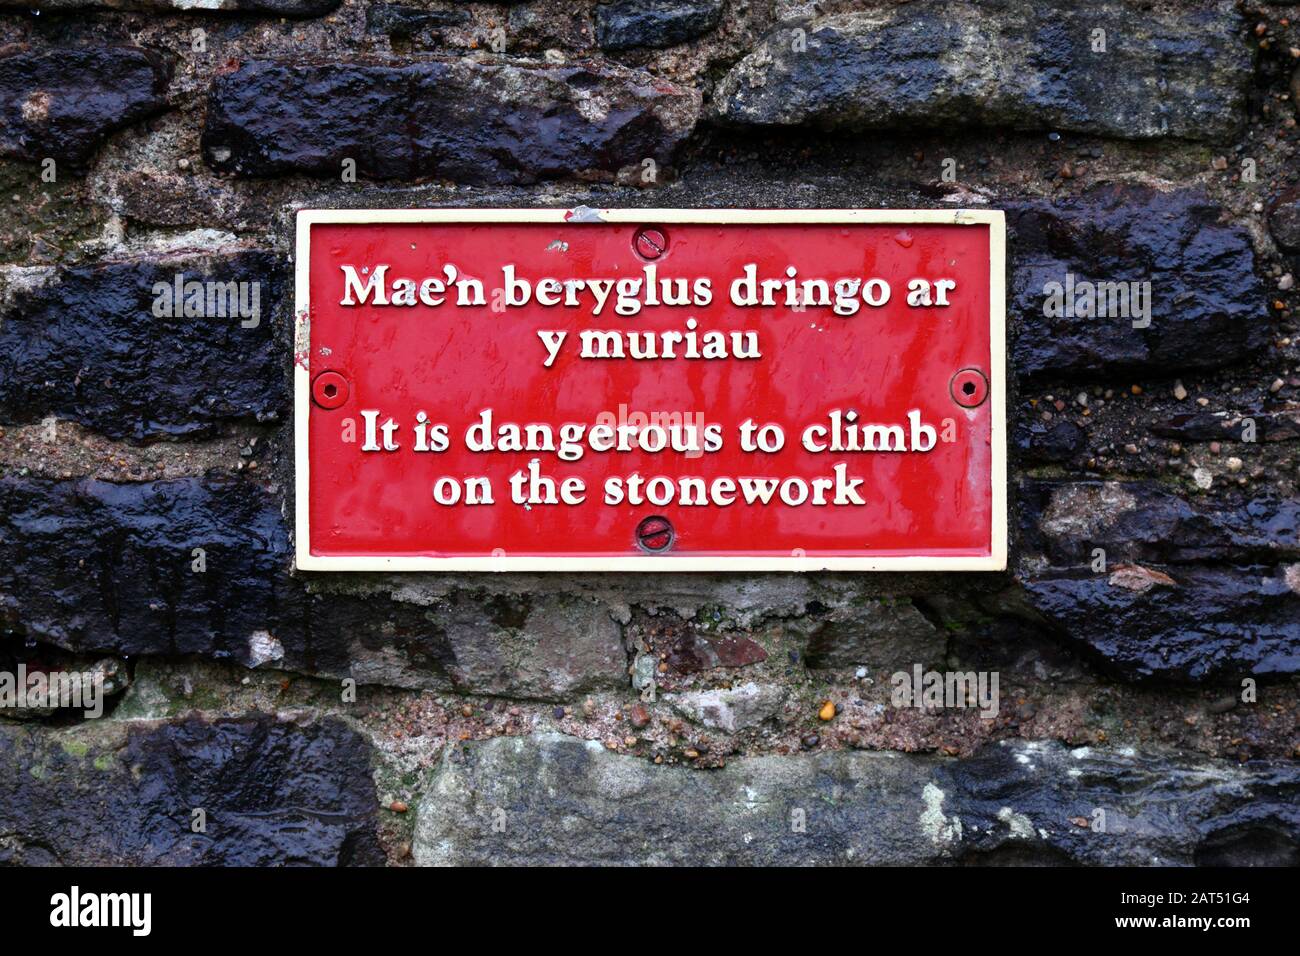 Sign in Welsh and English warning people not to climb on stone walls, Coity Castle, Mid Glamorgan, Wales, UK Stock Photo